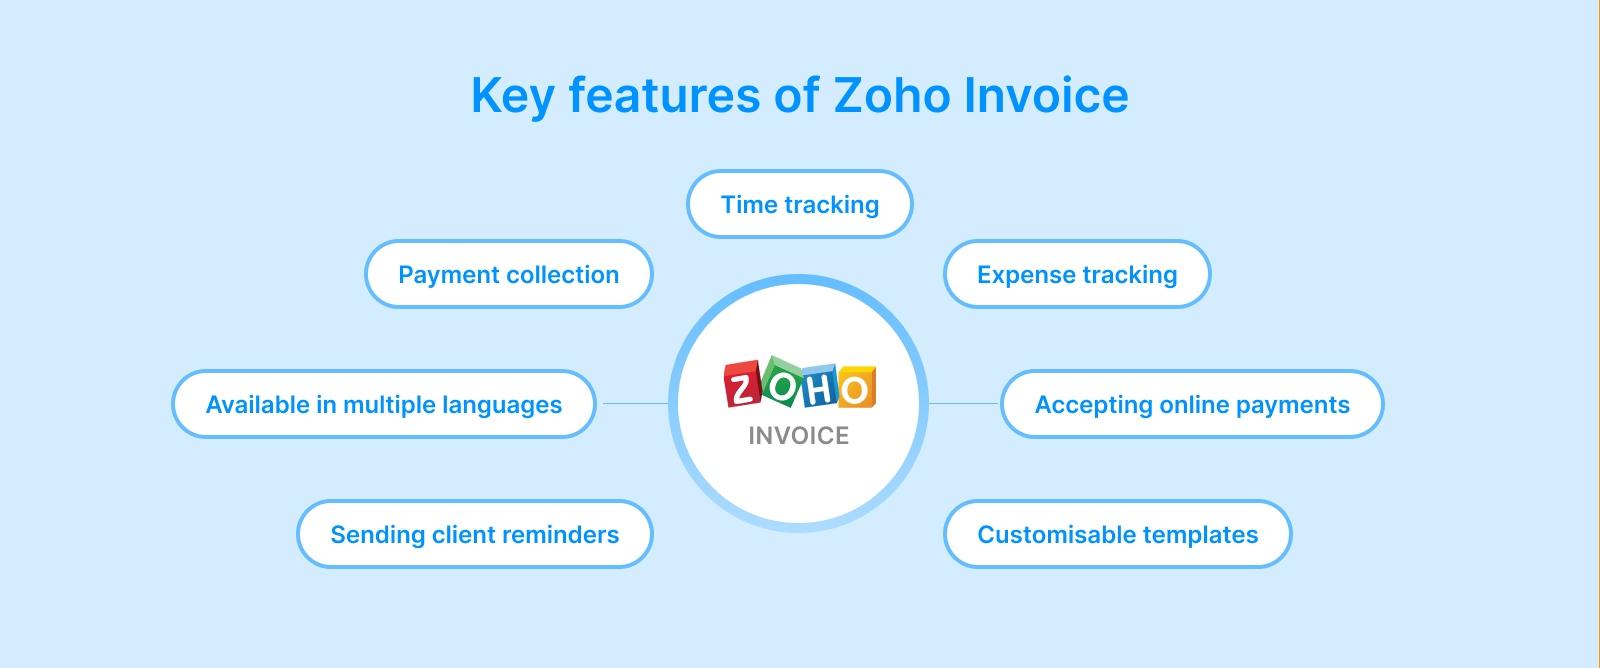 image-key-features-zoho-invoice (1).png